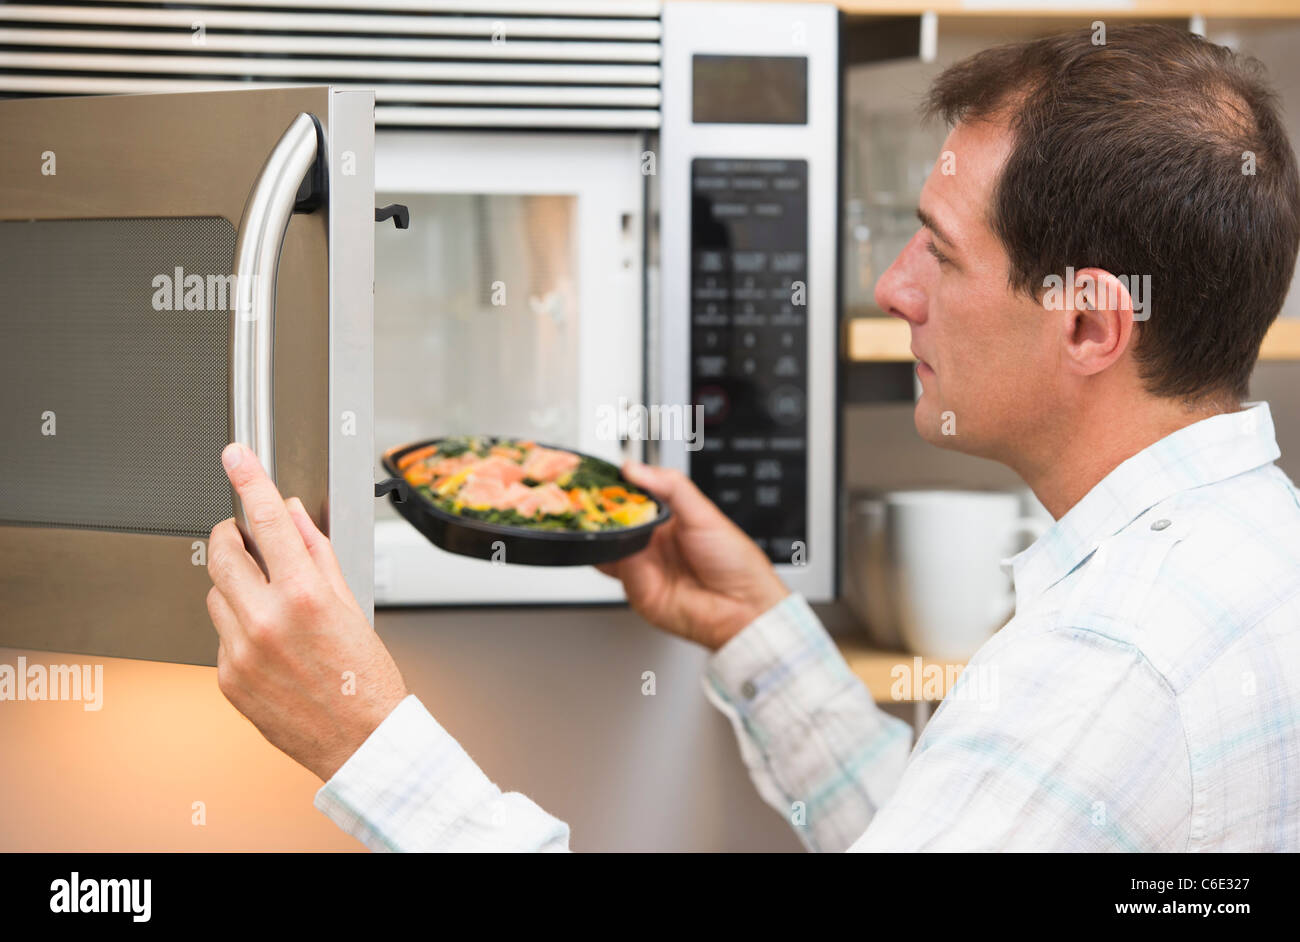 USA, New Jersey, Jersey City, Man inserting meal in microwave oven Stock Photo